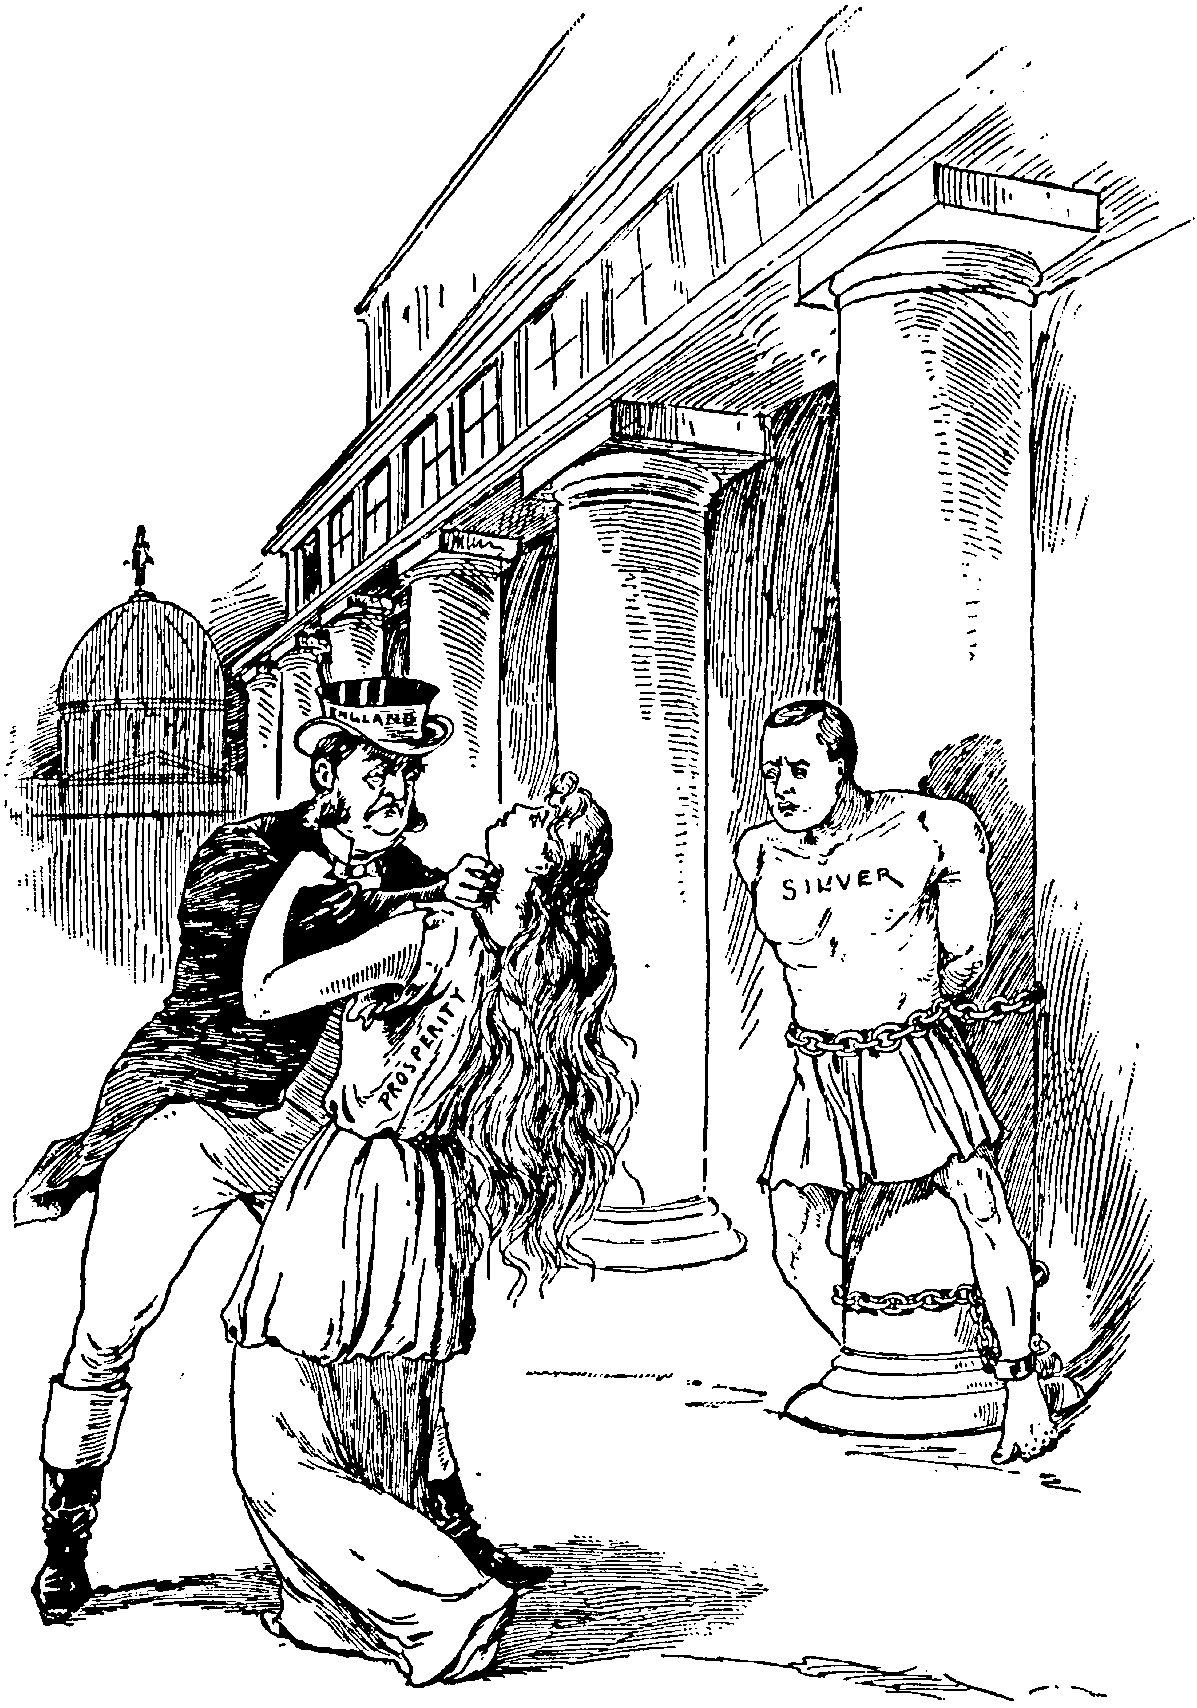 A drawing of England destroying prosperity. Coin’s Financial School by WD Harvey 1894. Reformated for digital by Andy Chalkley in 2017.